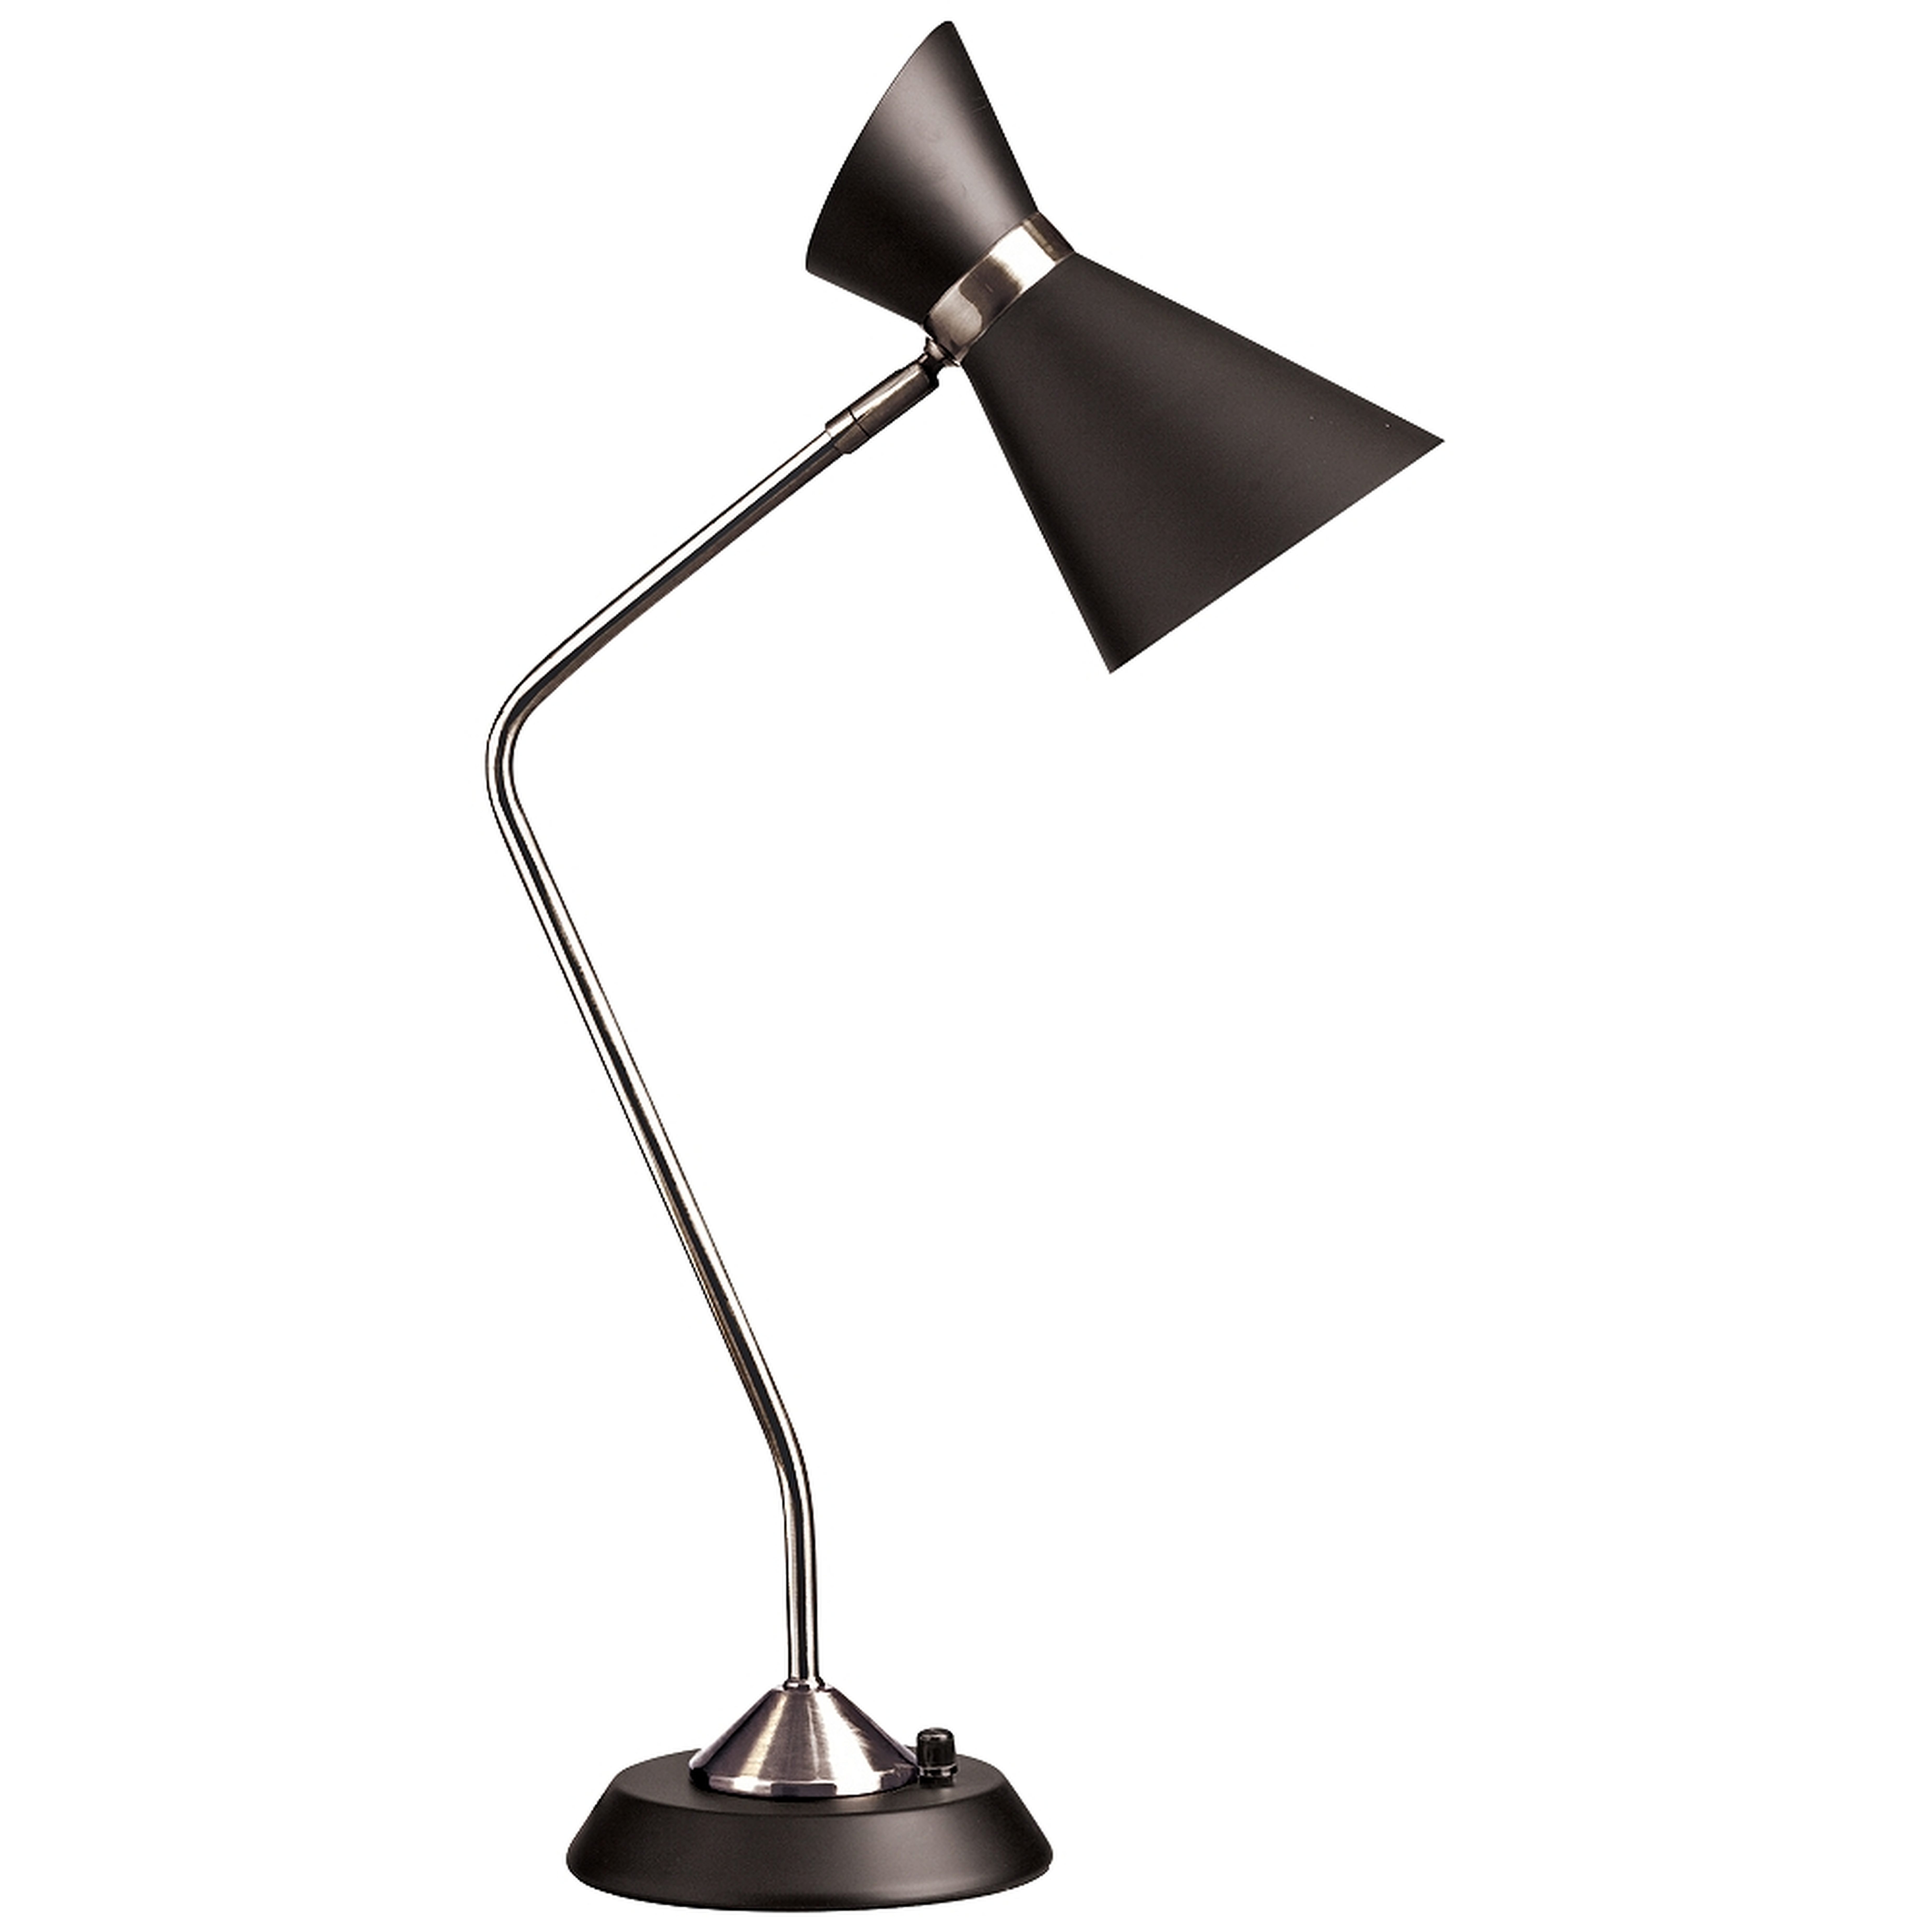 Emery Polished Chrome and Matte Black Desk Lamp - Lamps Plus